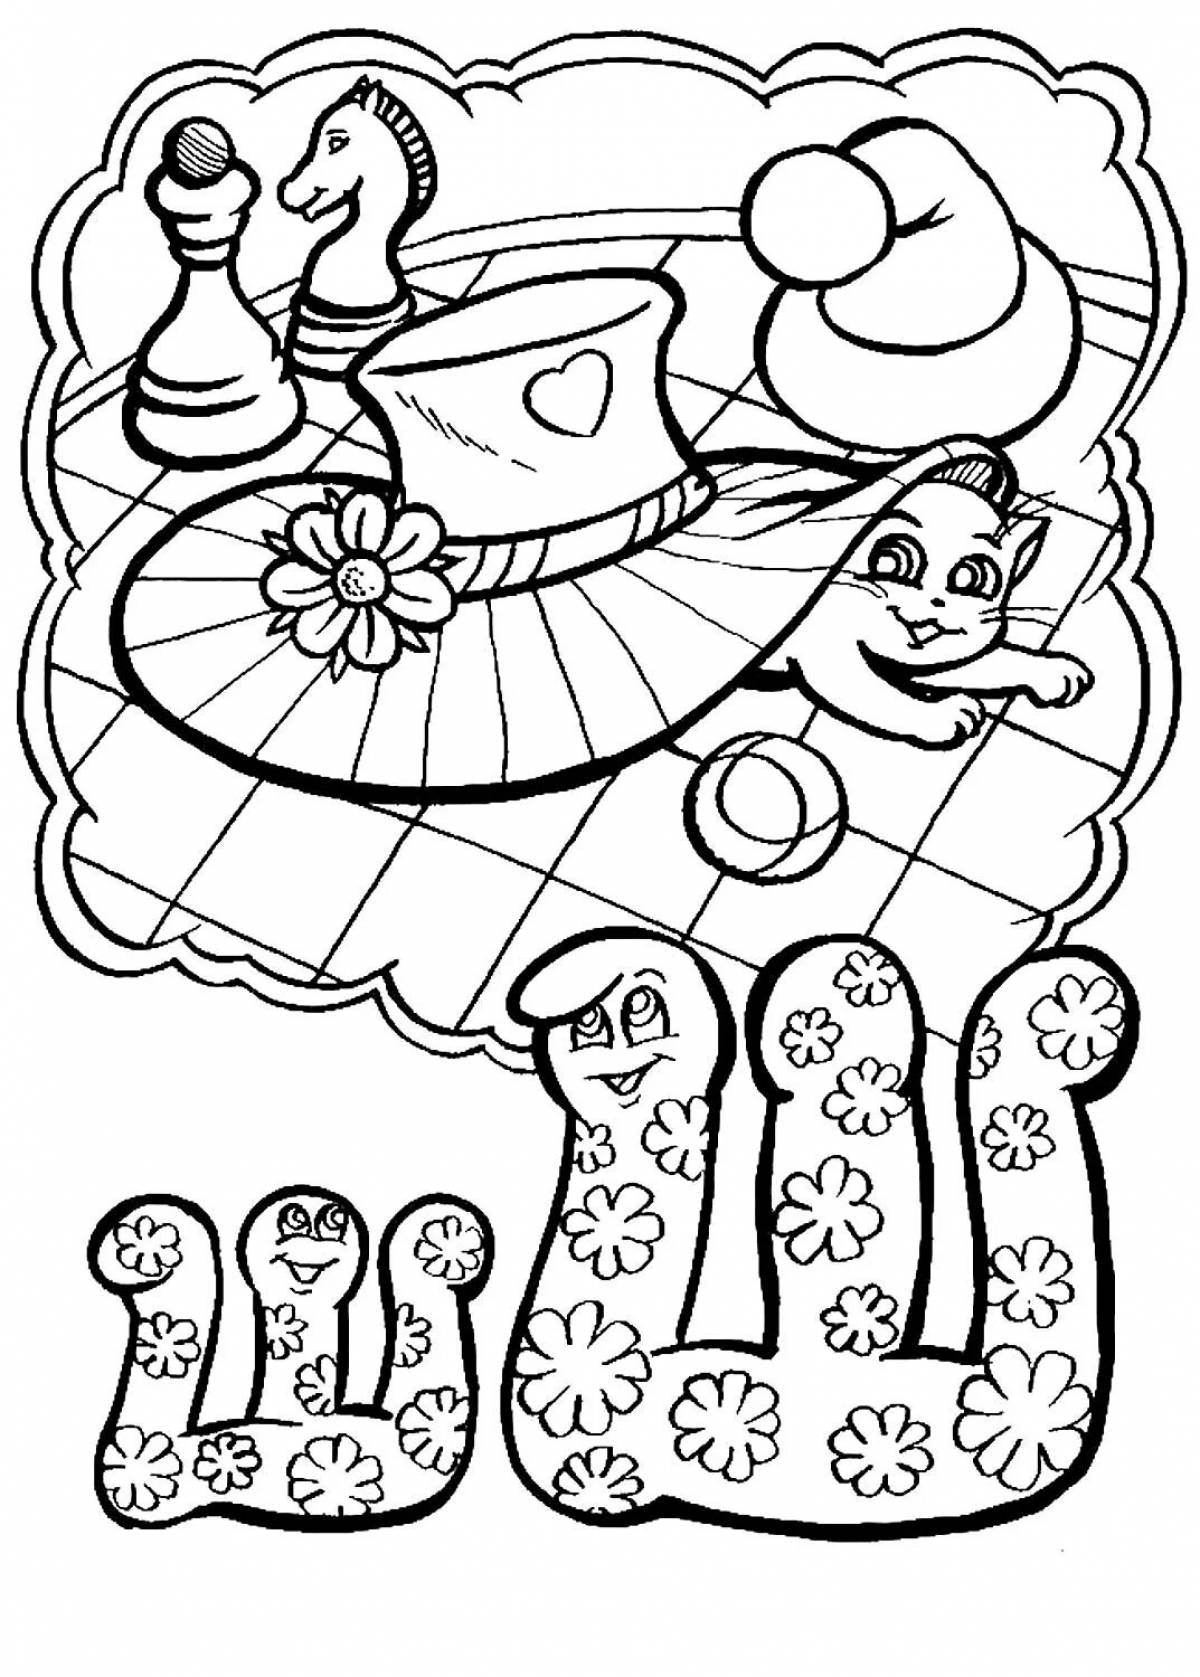 Coloring book sparkling letter w